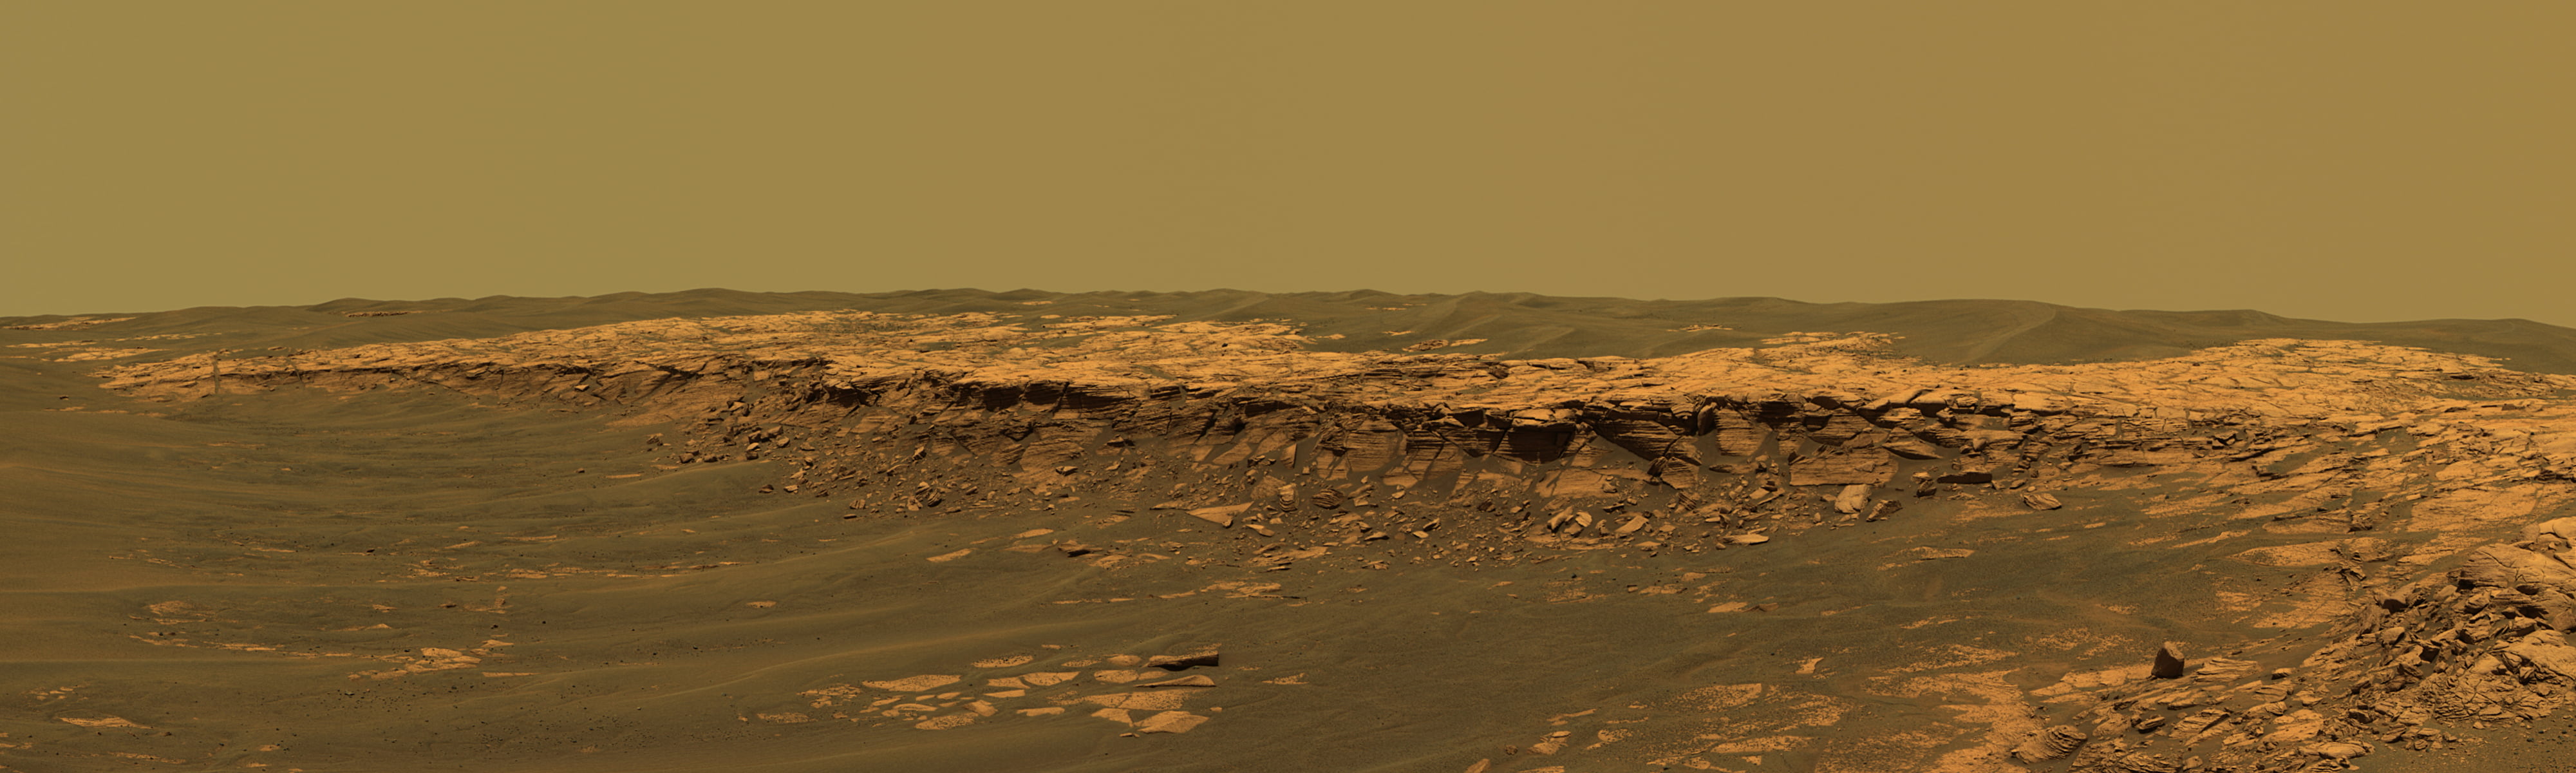 brown mountains, photo, landscape, planet, Mars, NASA, Opportunity